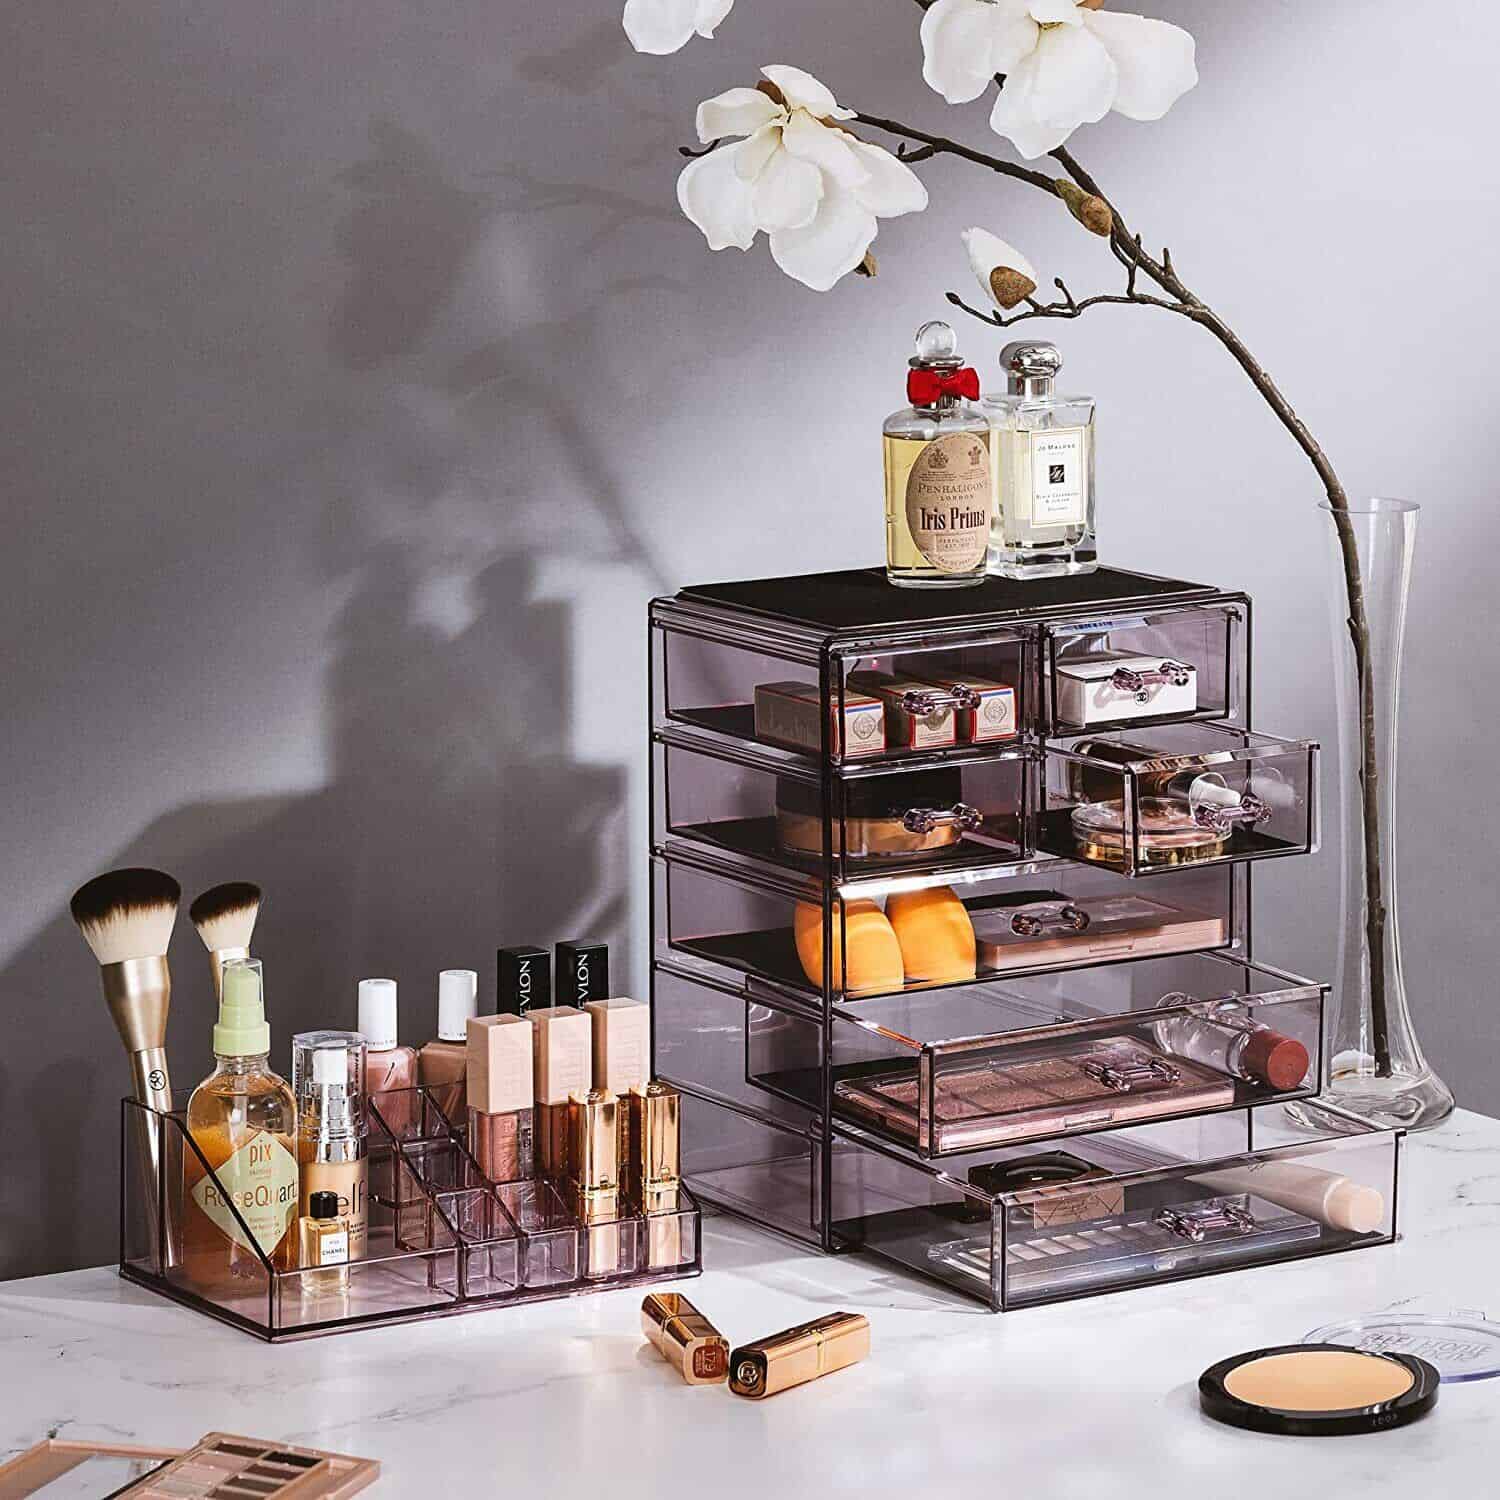 A makeup organizer on a table.